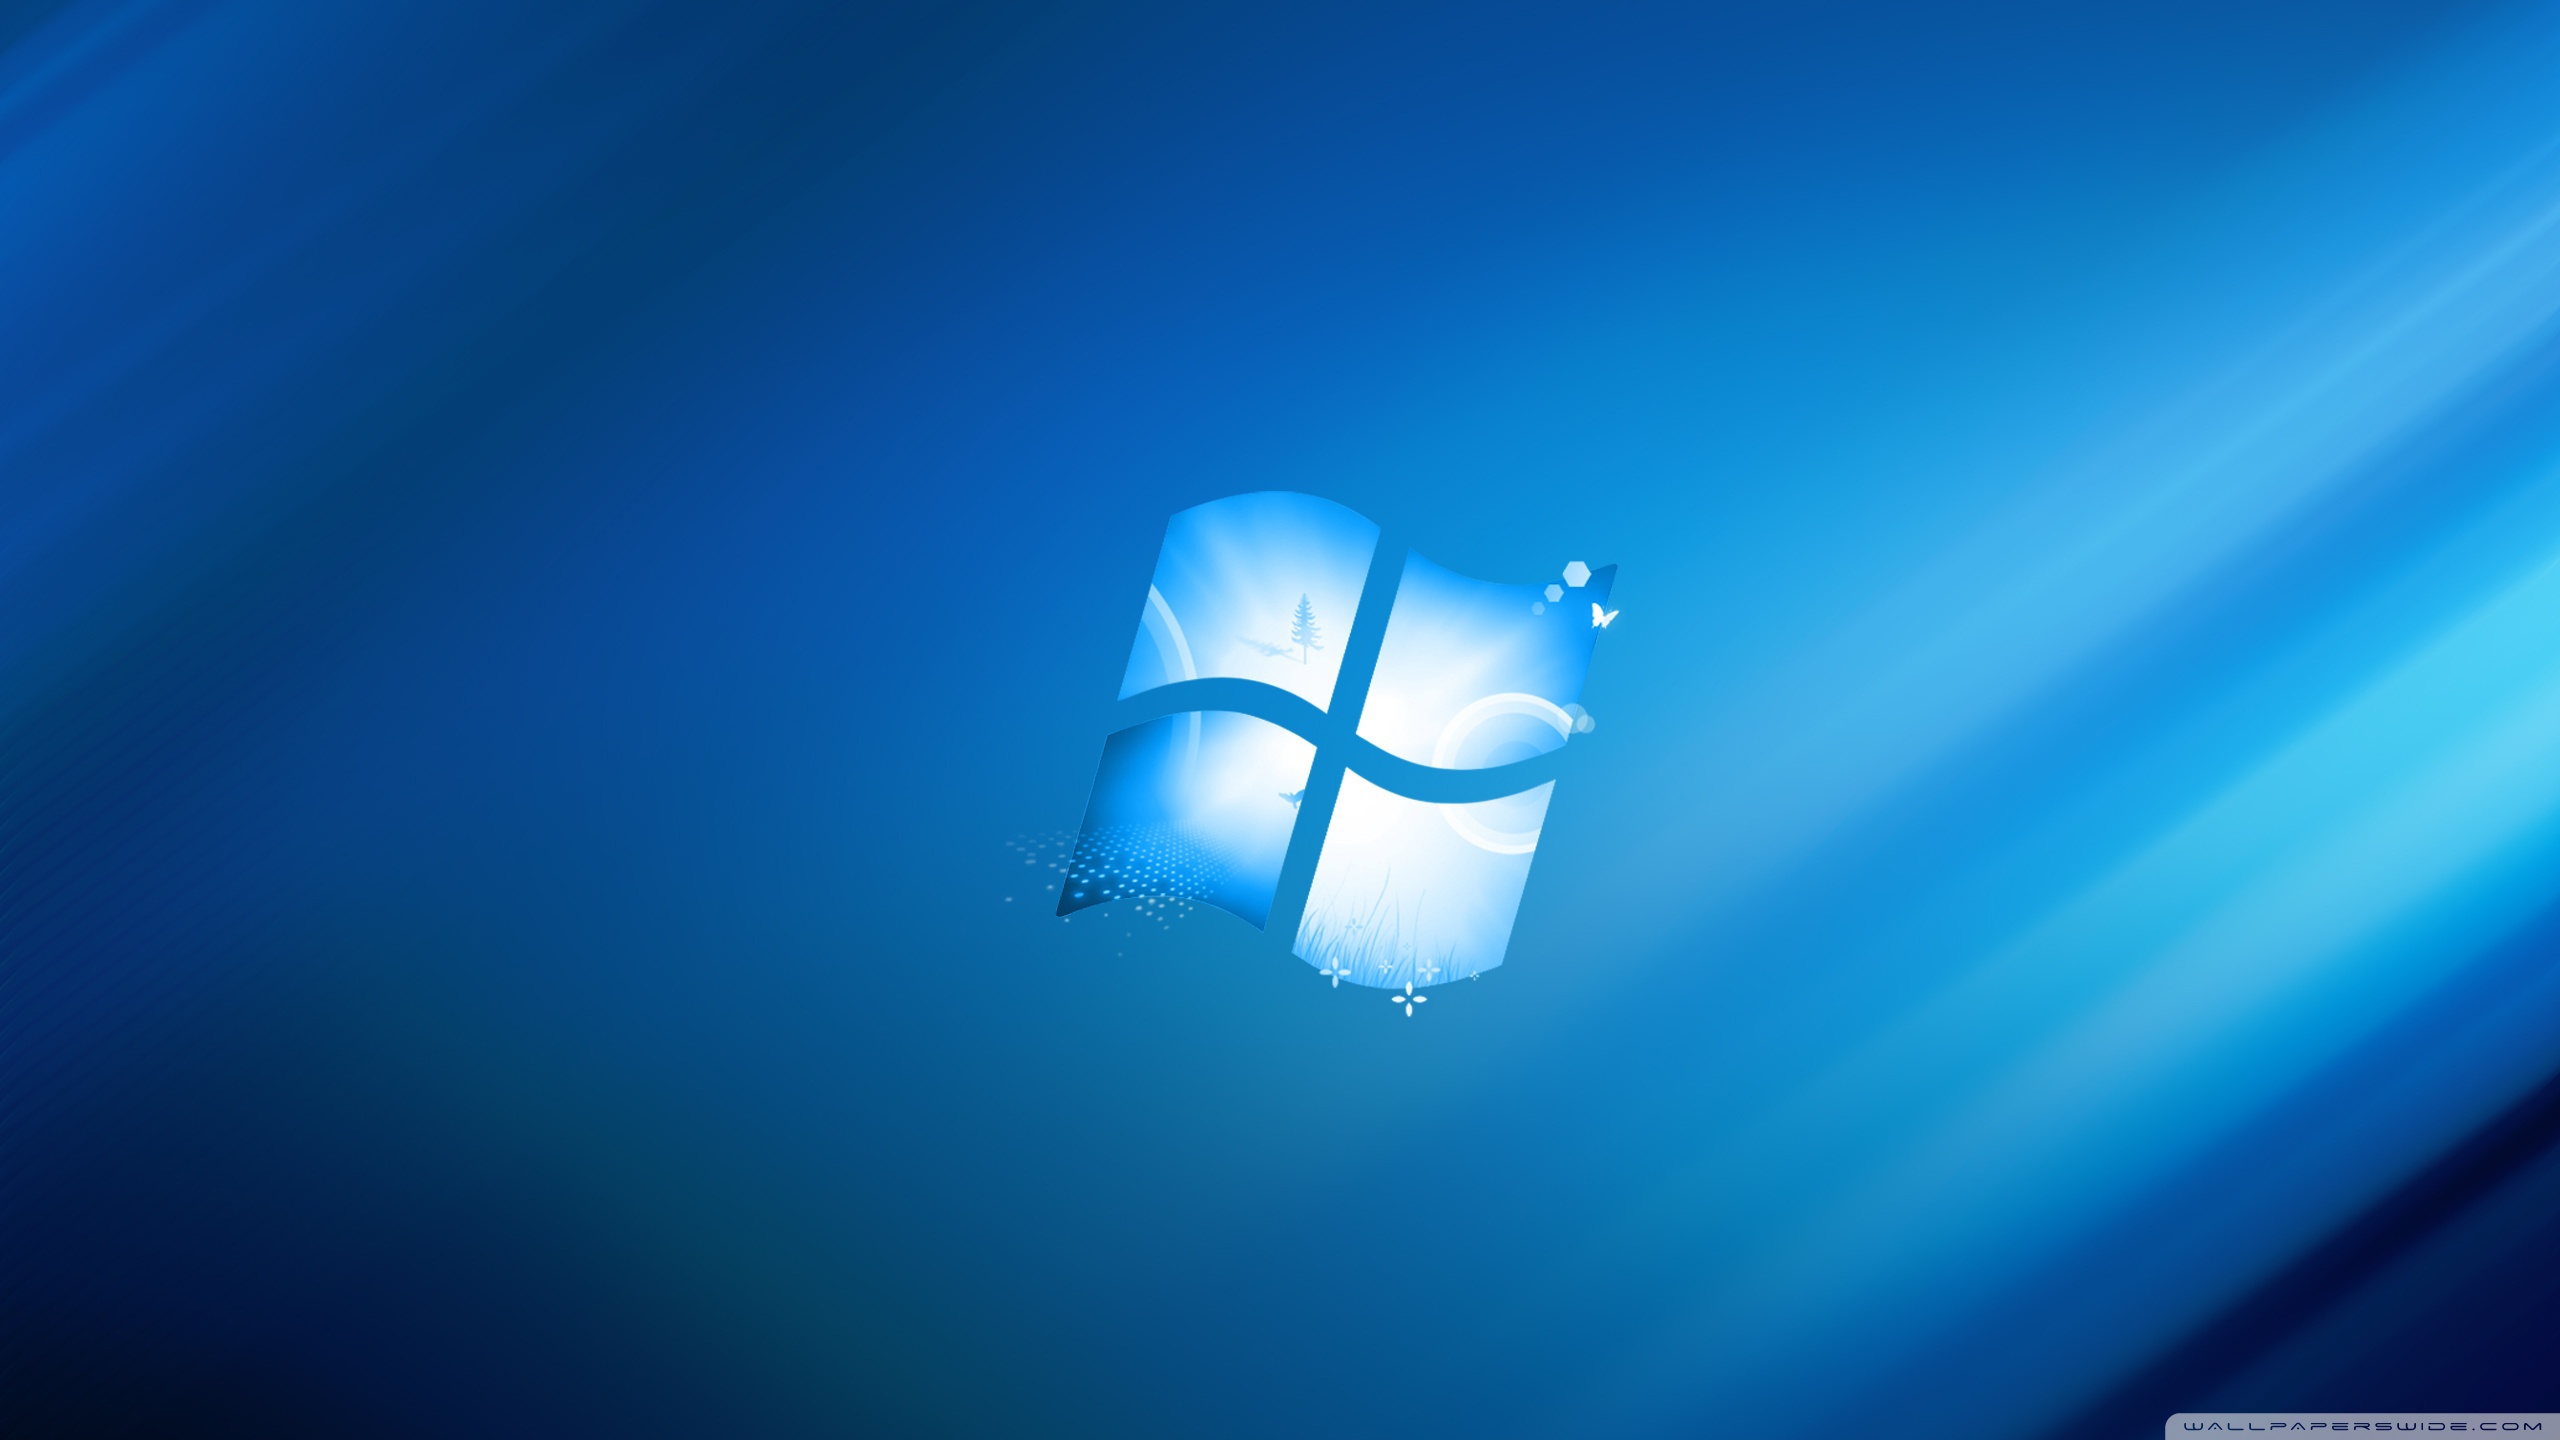 Windows 8 blue theme wallpapers and images - wallpapers ...